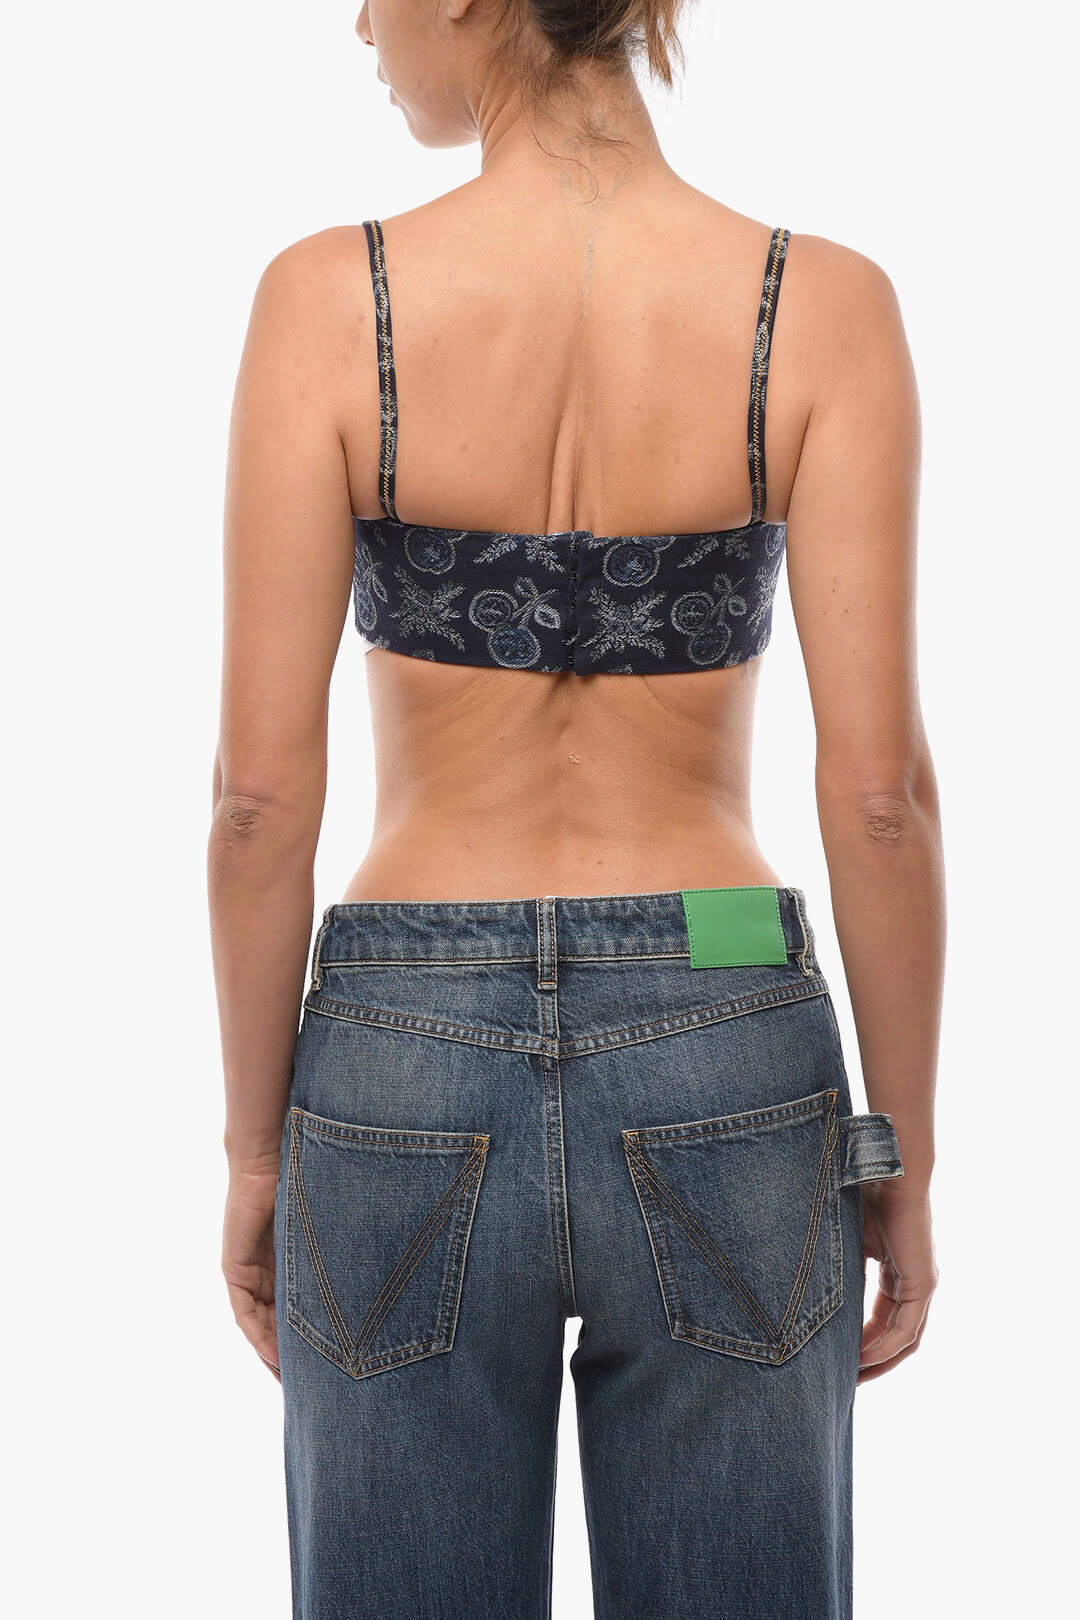 Etro Embroidered Bralette Top women - Glamood Outlet